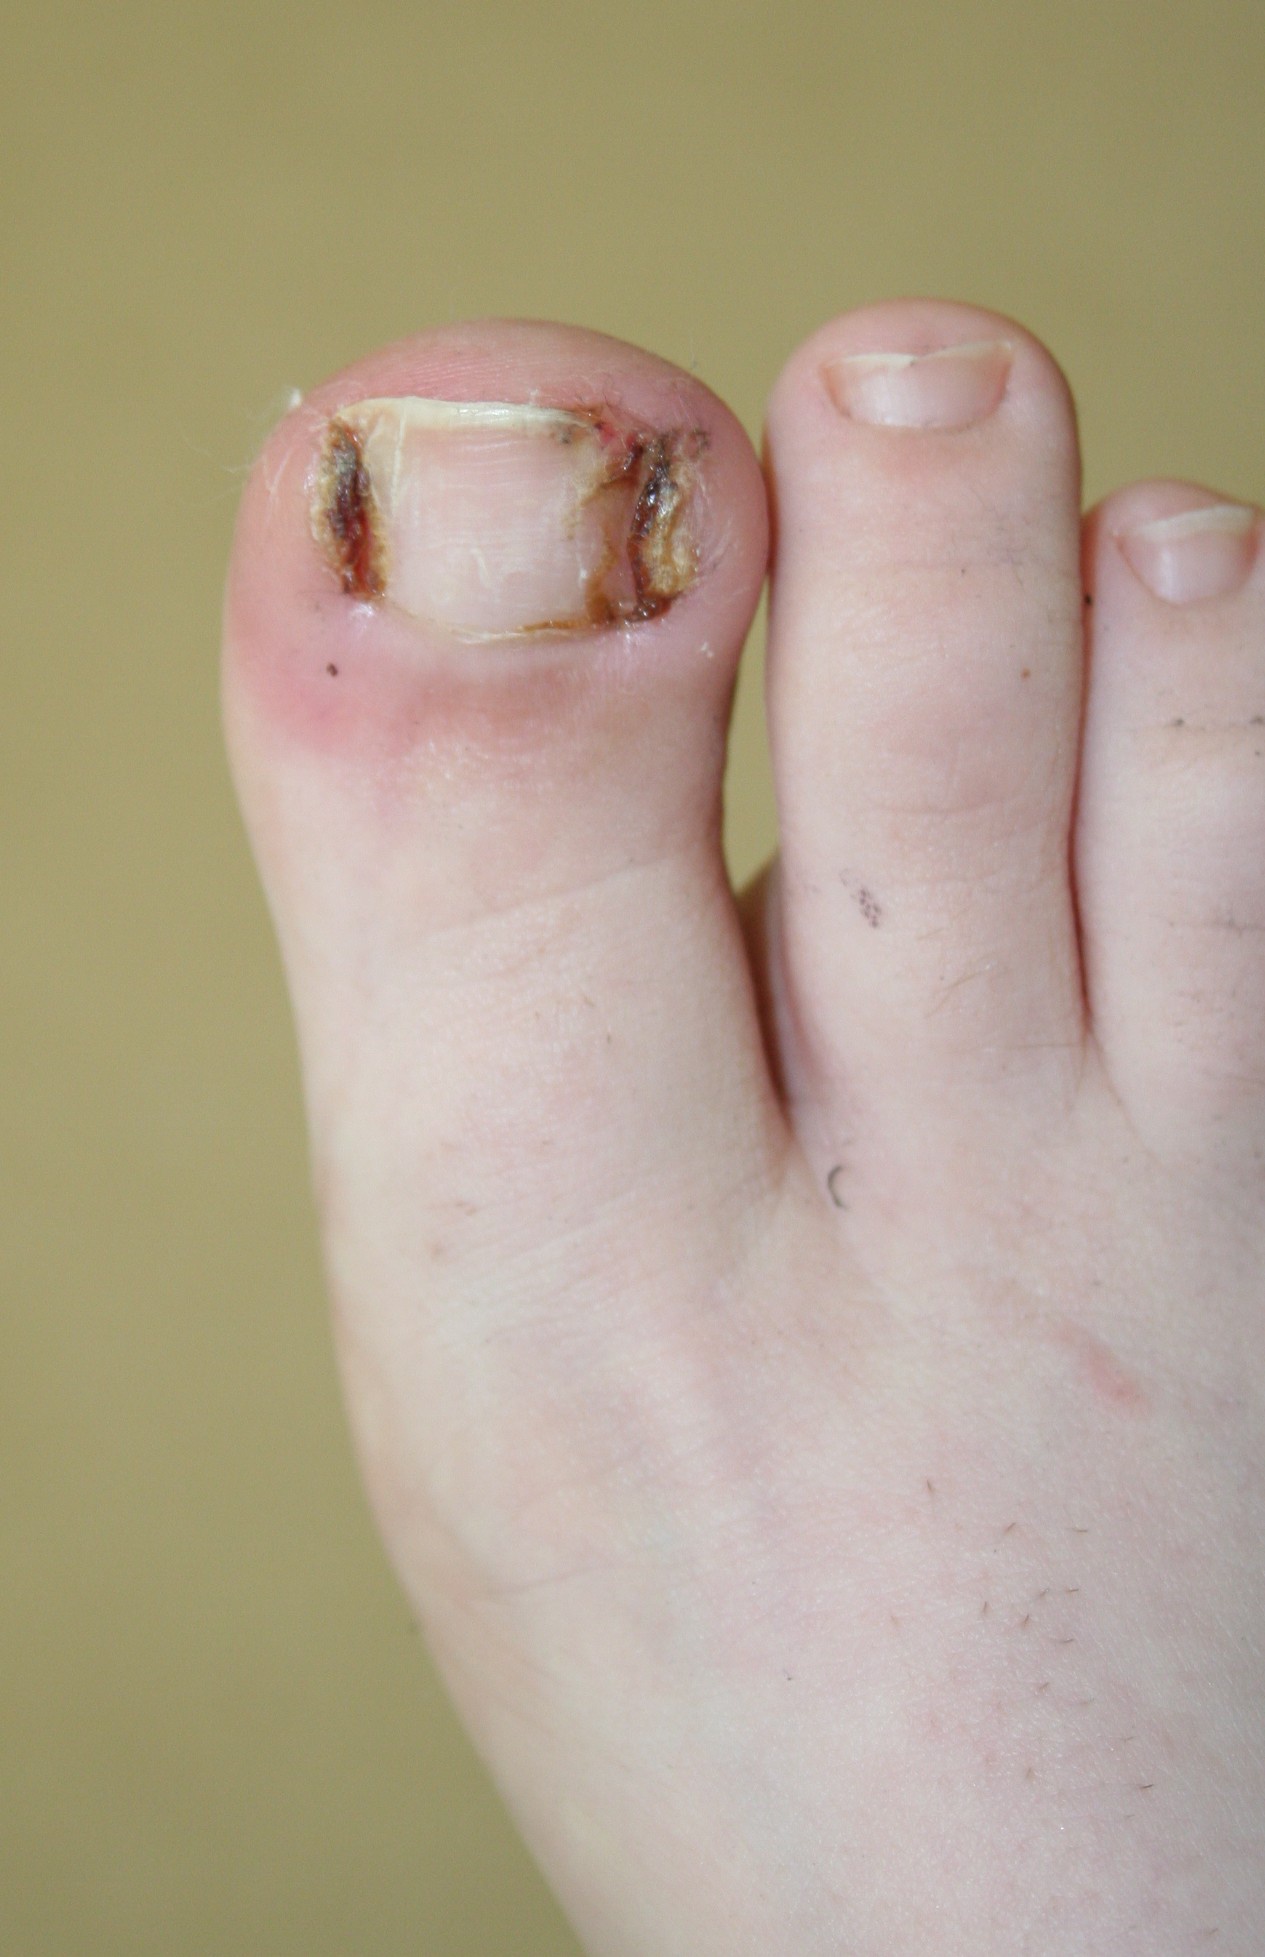 Ingrown Toe Nail Removal And Treatment Doctor Chicago,iL